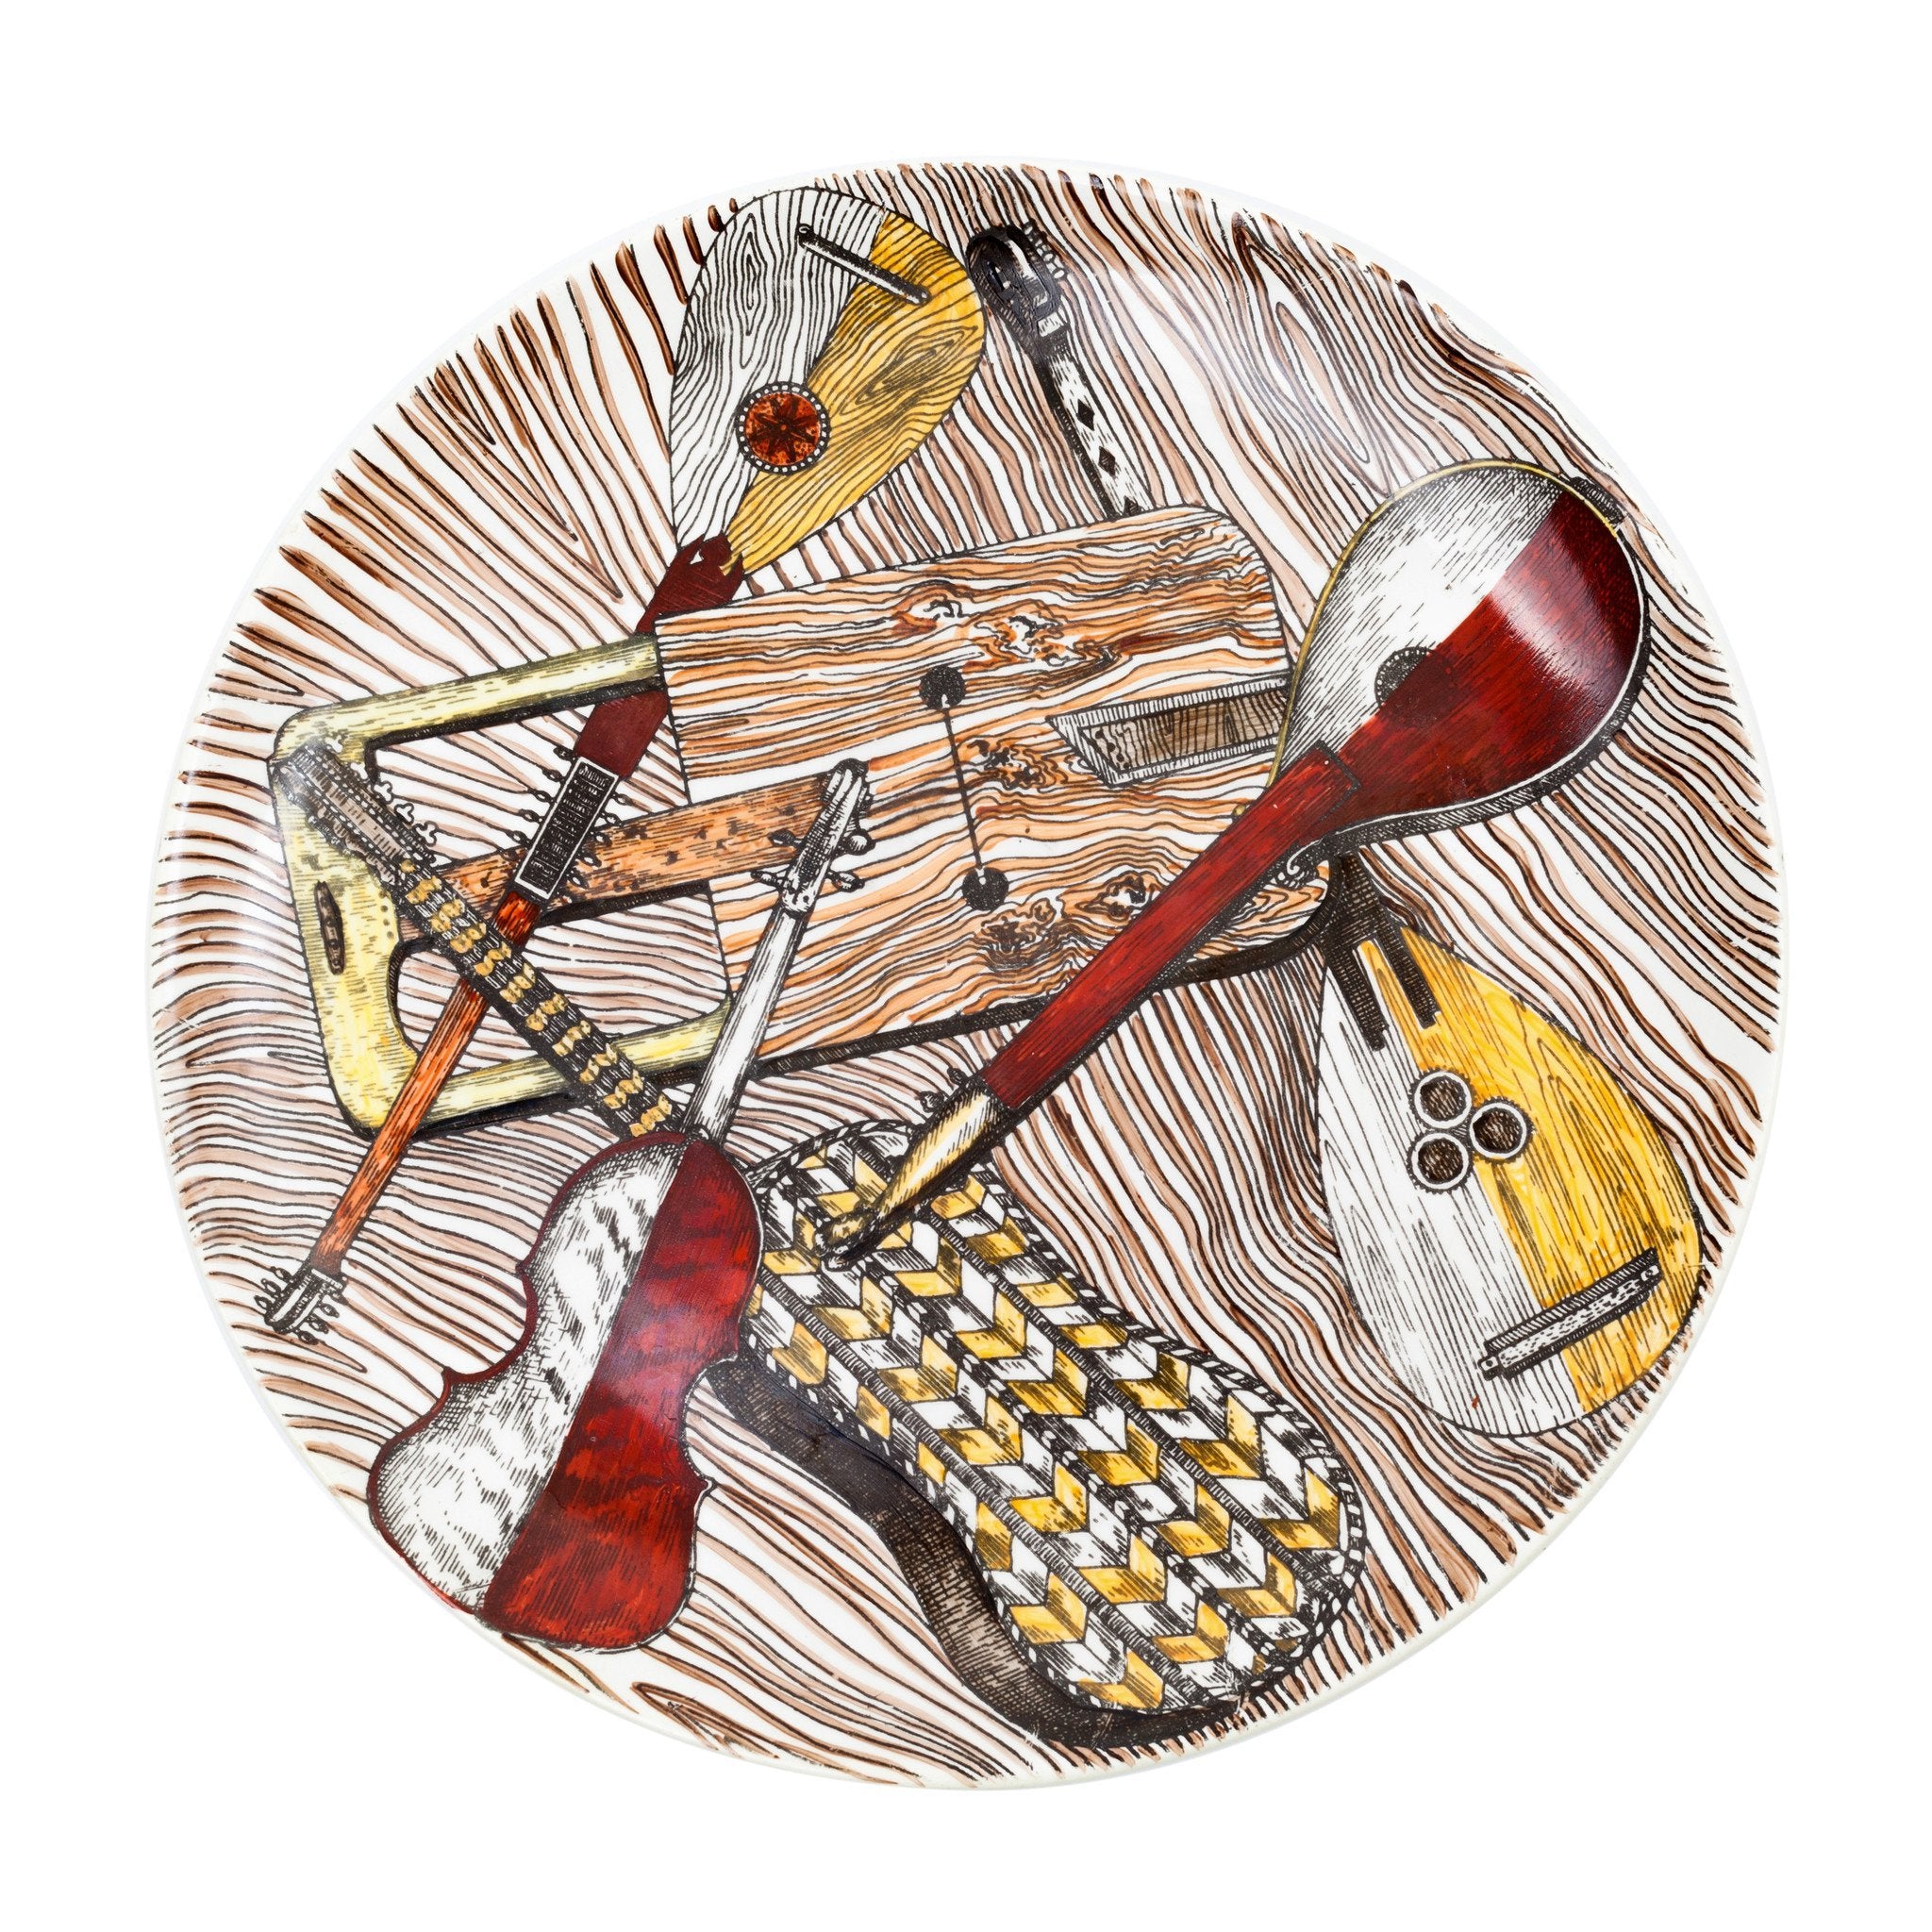 Piero Fornasetti, a Set of 6 "Musical Instruments" Dishes, 1953 - ONEROOM